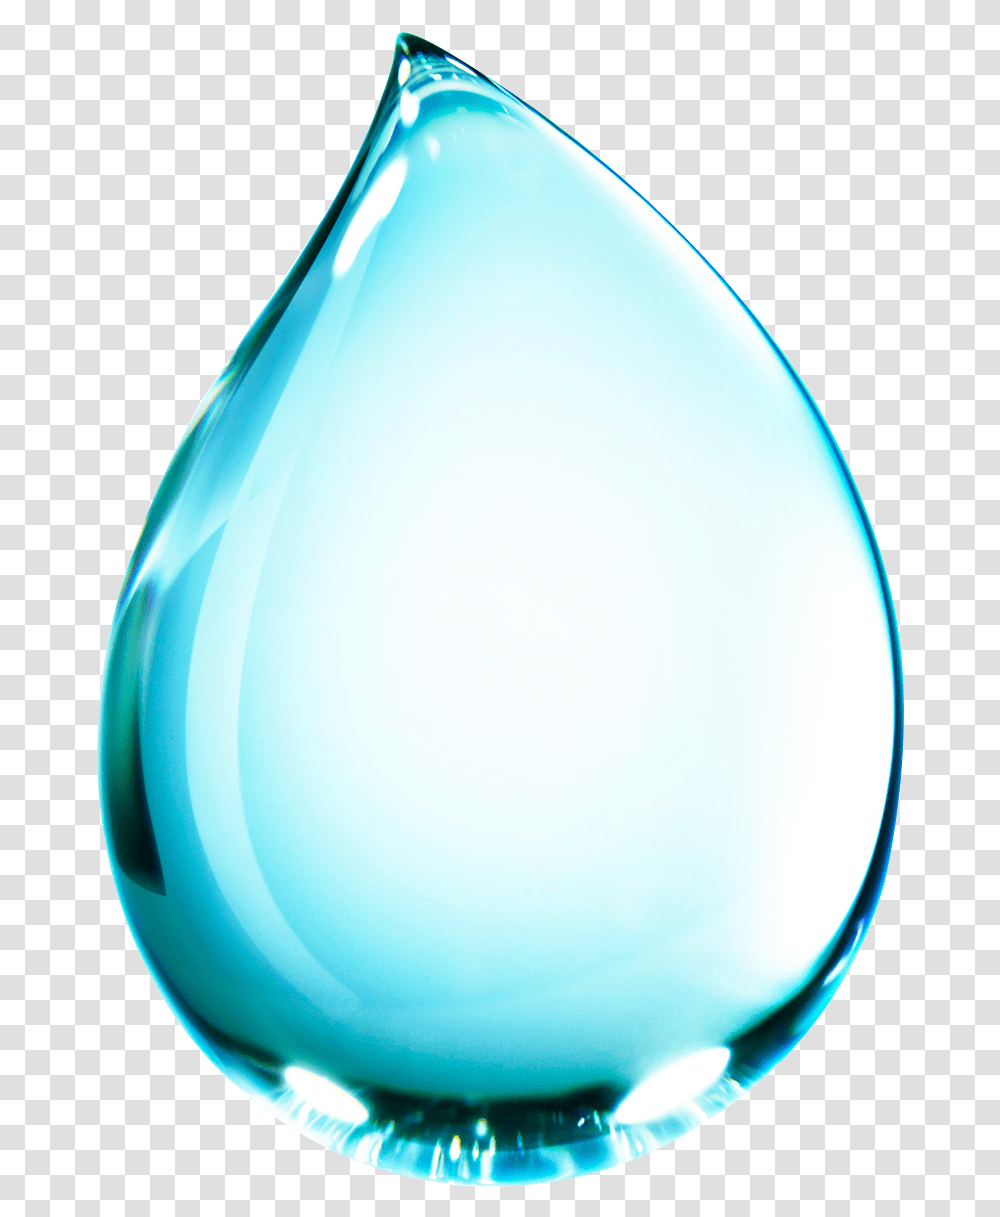 Water Drop Transparency And Translucency Nail Polish Tableware, Droplet, Balloon, Mouse, Hardware Transparent Png